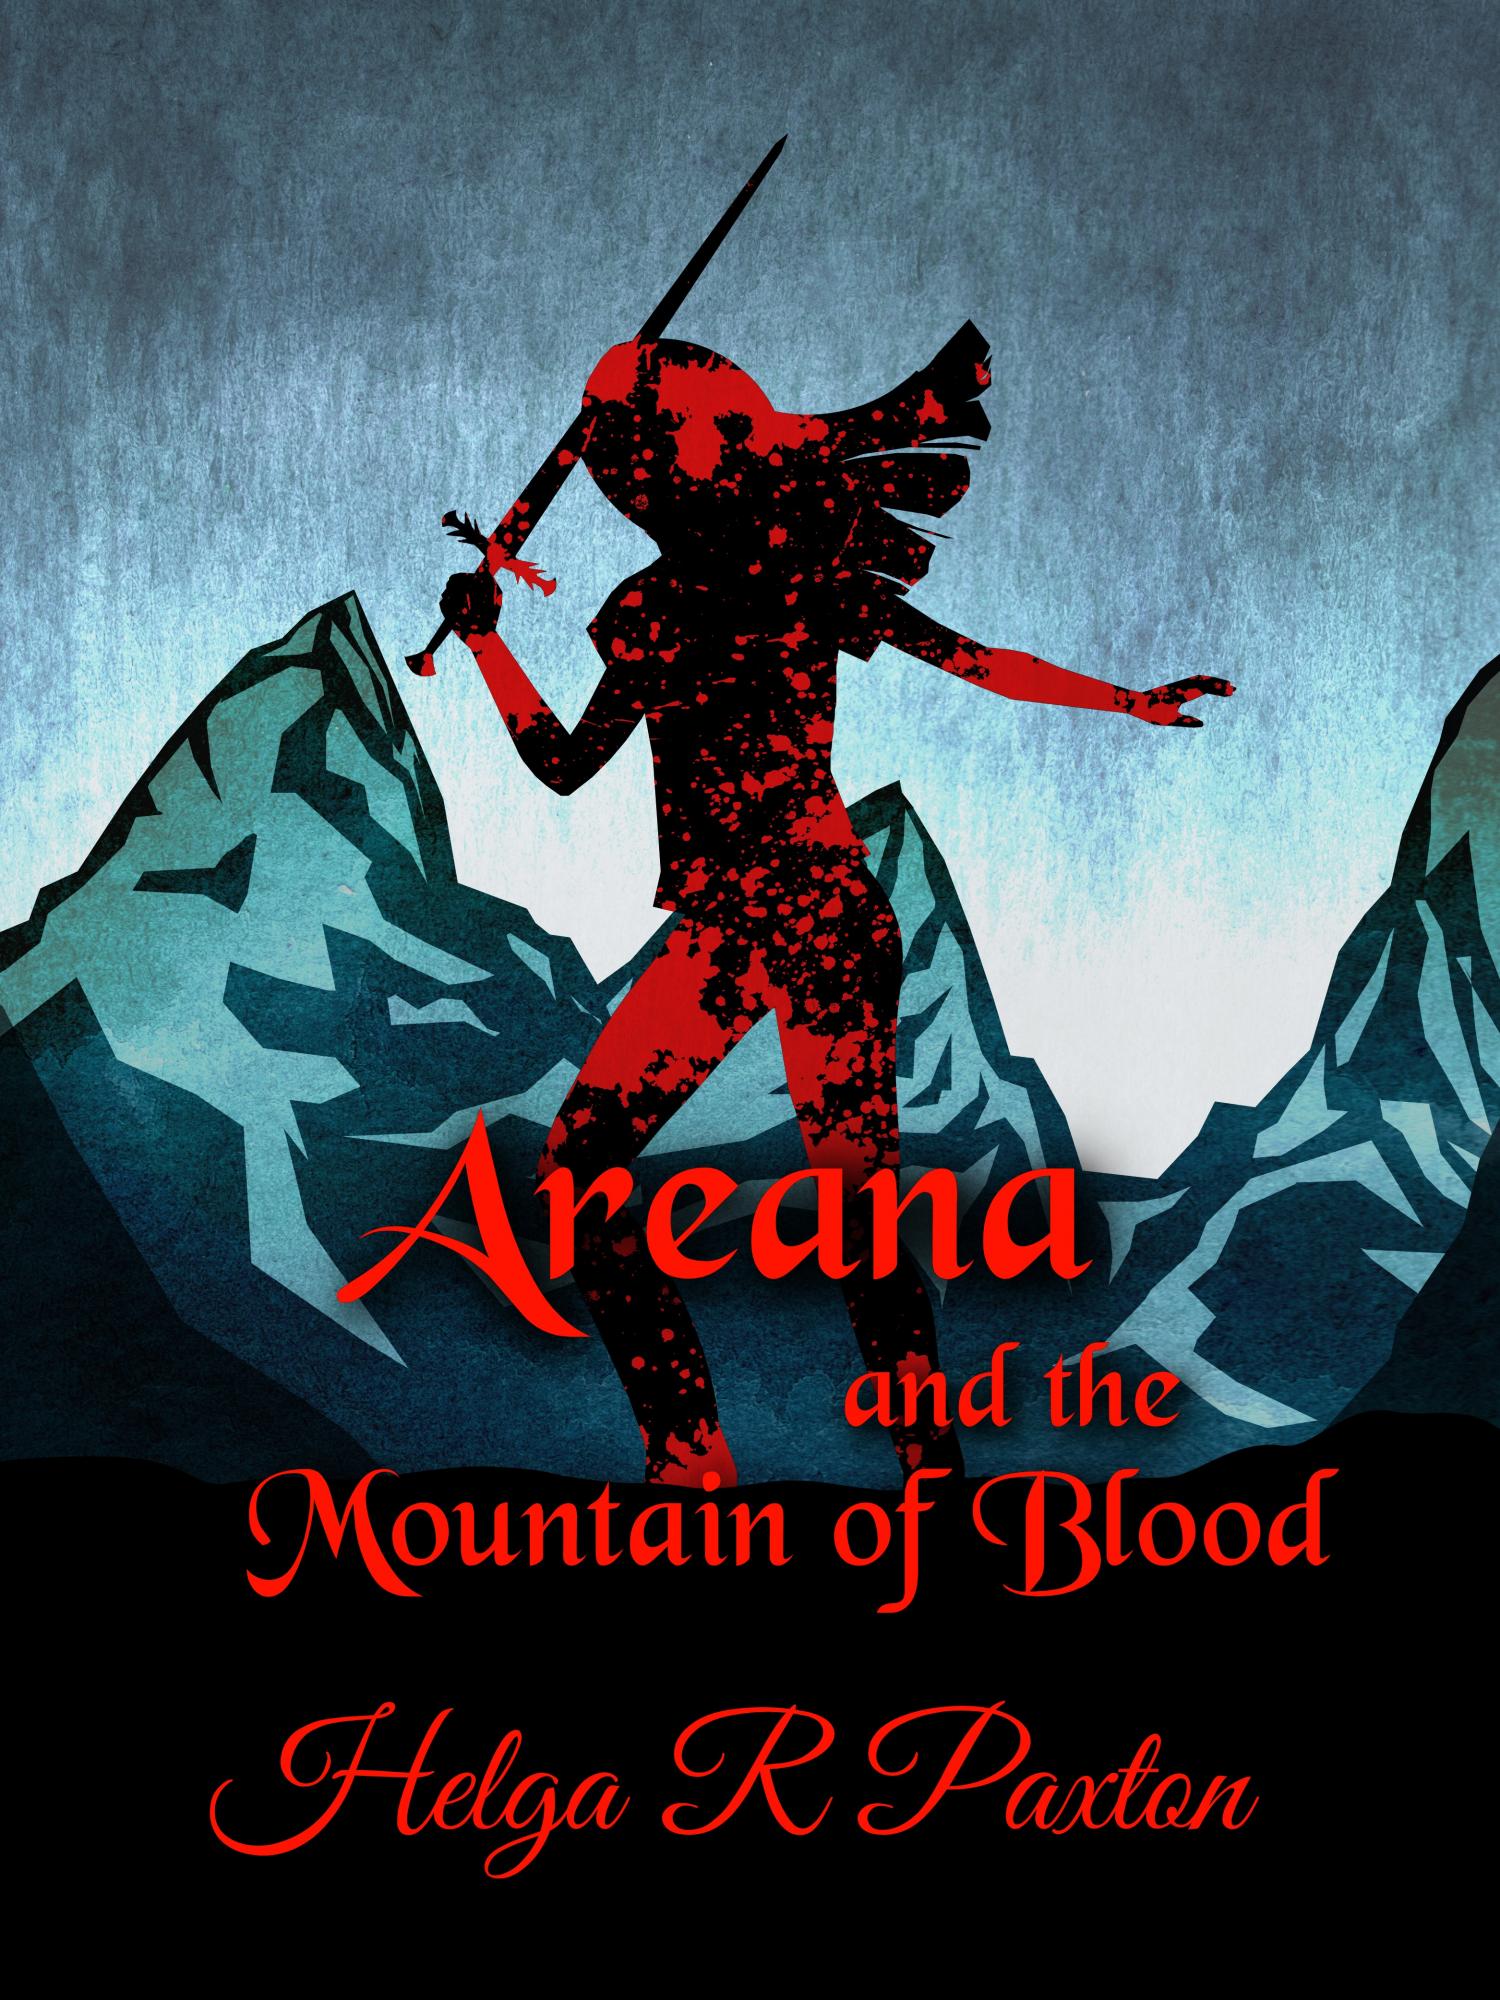 Areana and the Mountain of Blood by Helga R Paxton, 29-April-2021